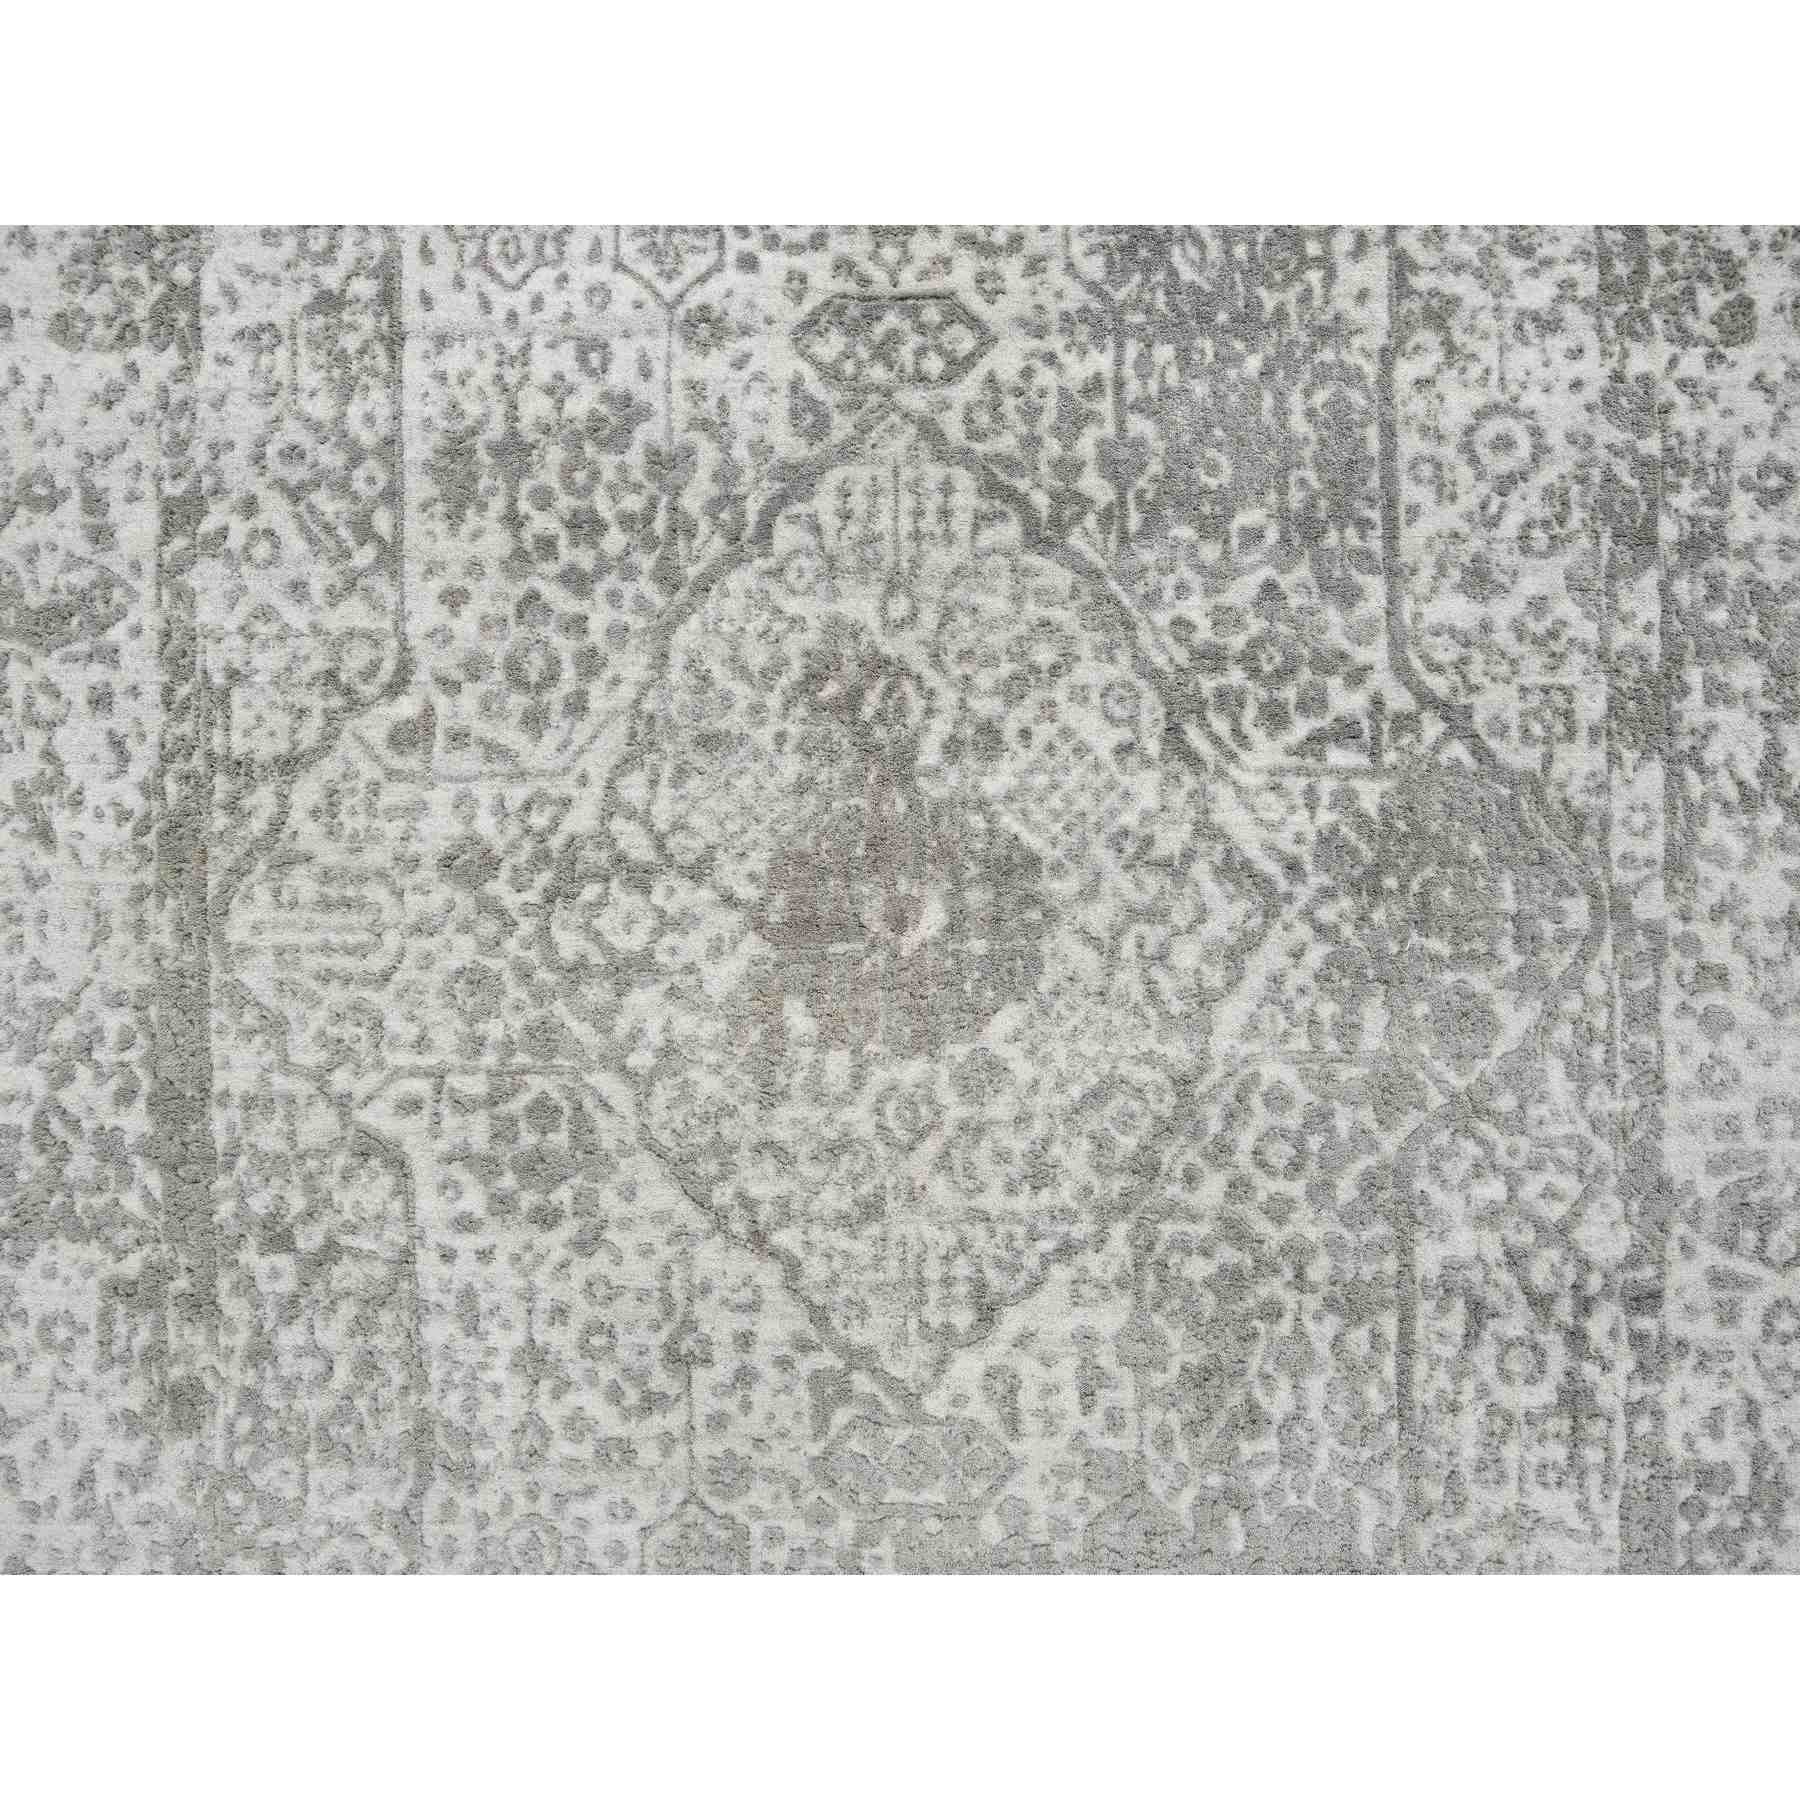 Transitional-Hand-Knotted-Rug-326045